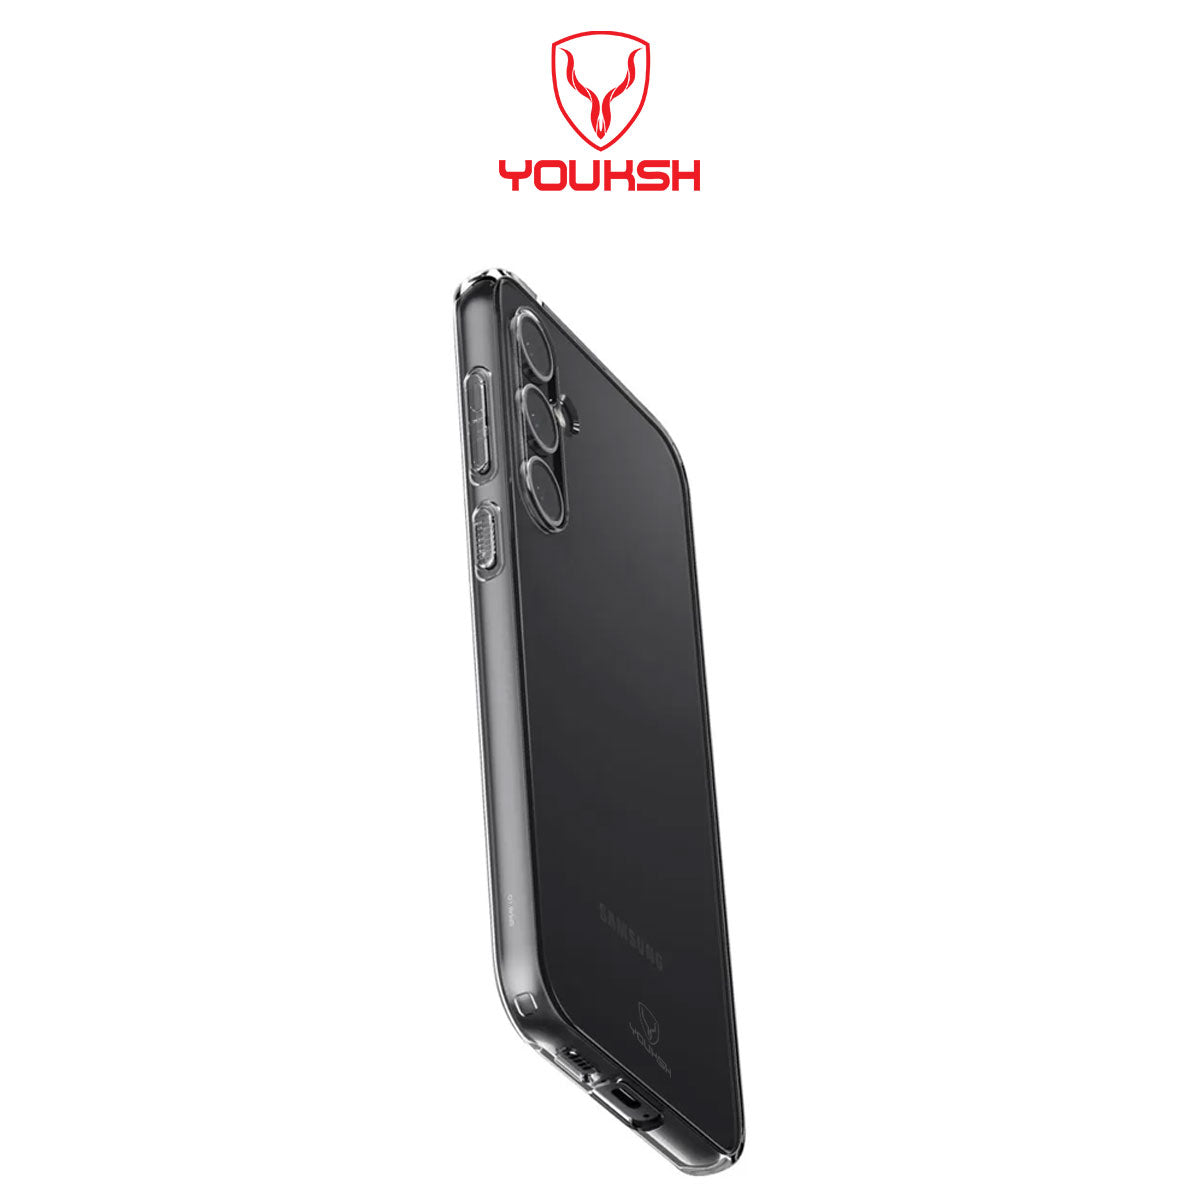 YOUKSH Samsung Galaxy S23FE Transparent Case - Samsung Galaxy S23FE Transparent Jelly Back Cover - Samsung Galaxy S23FE Soft Shock Proof Transparent Back Pouch - Samsung Galaxy S23FE Crystal Clear Cover.